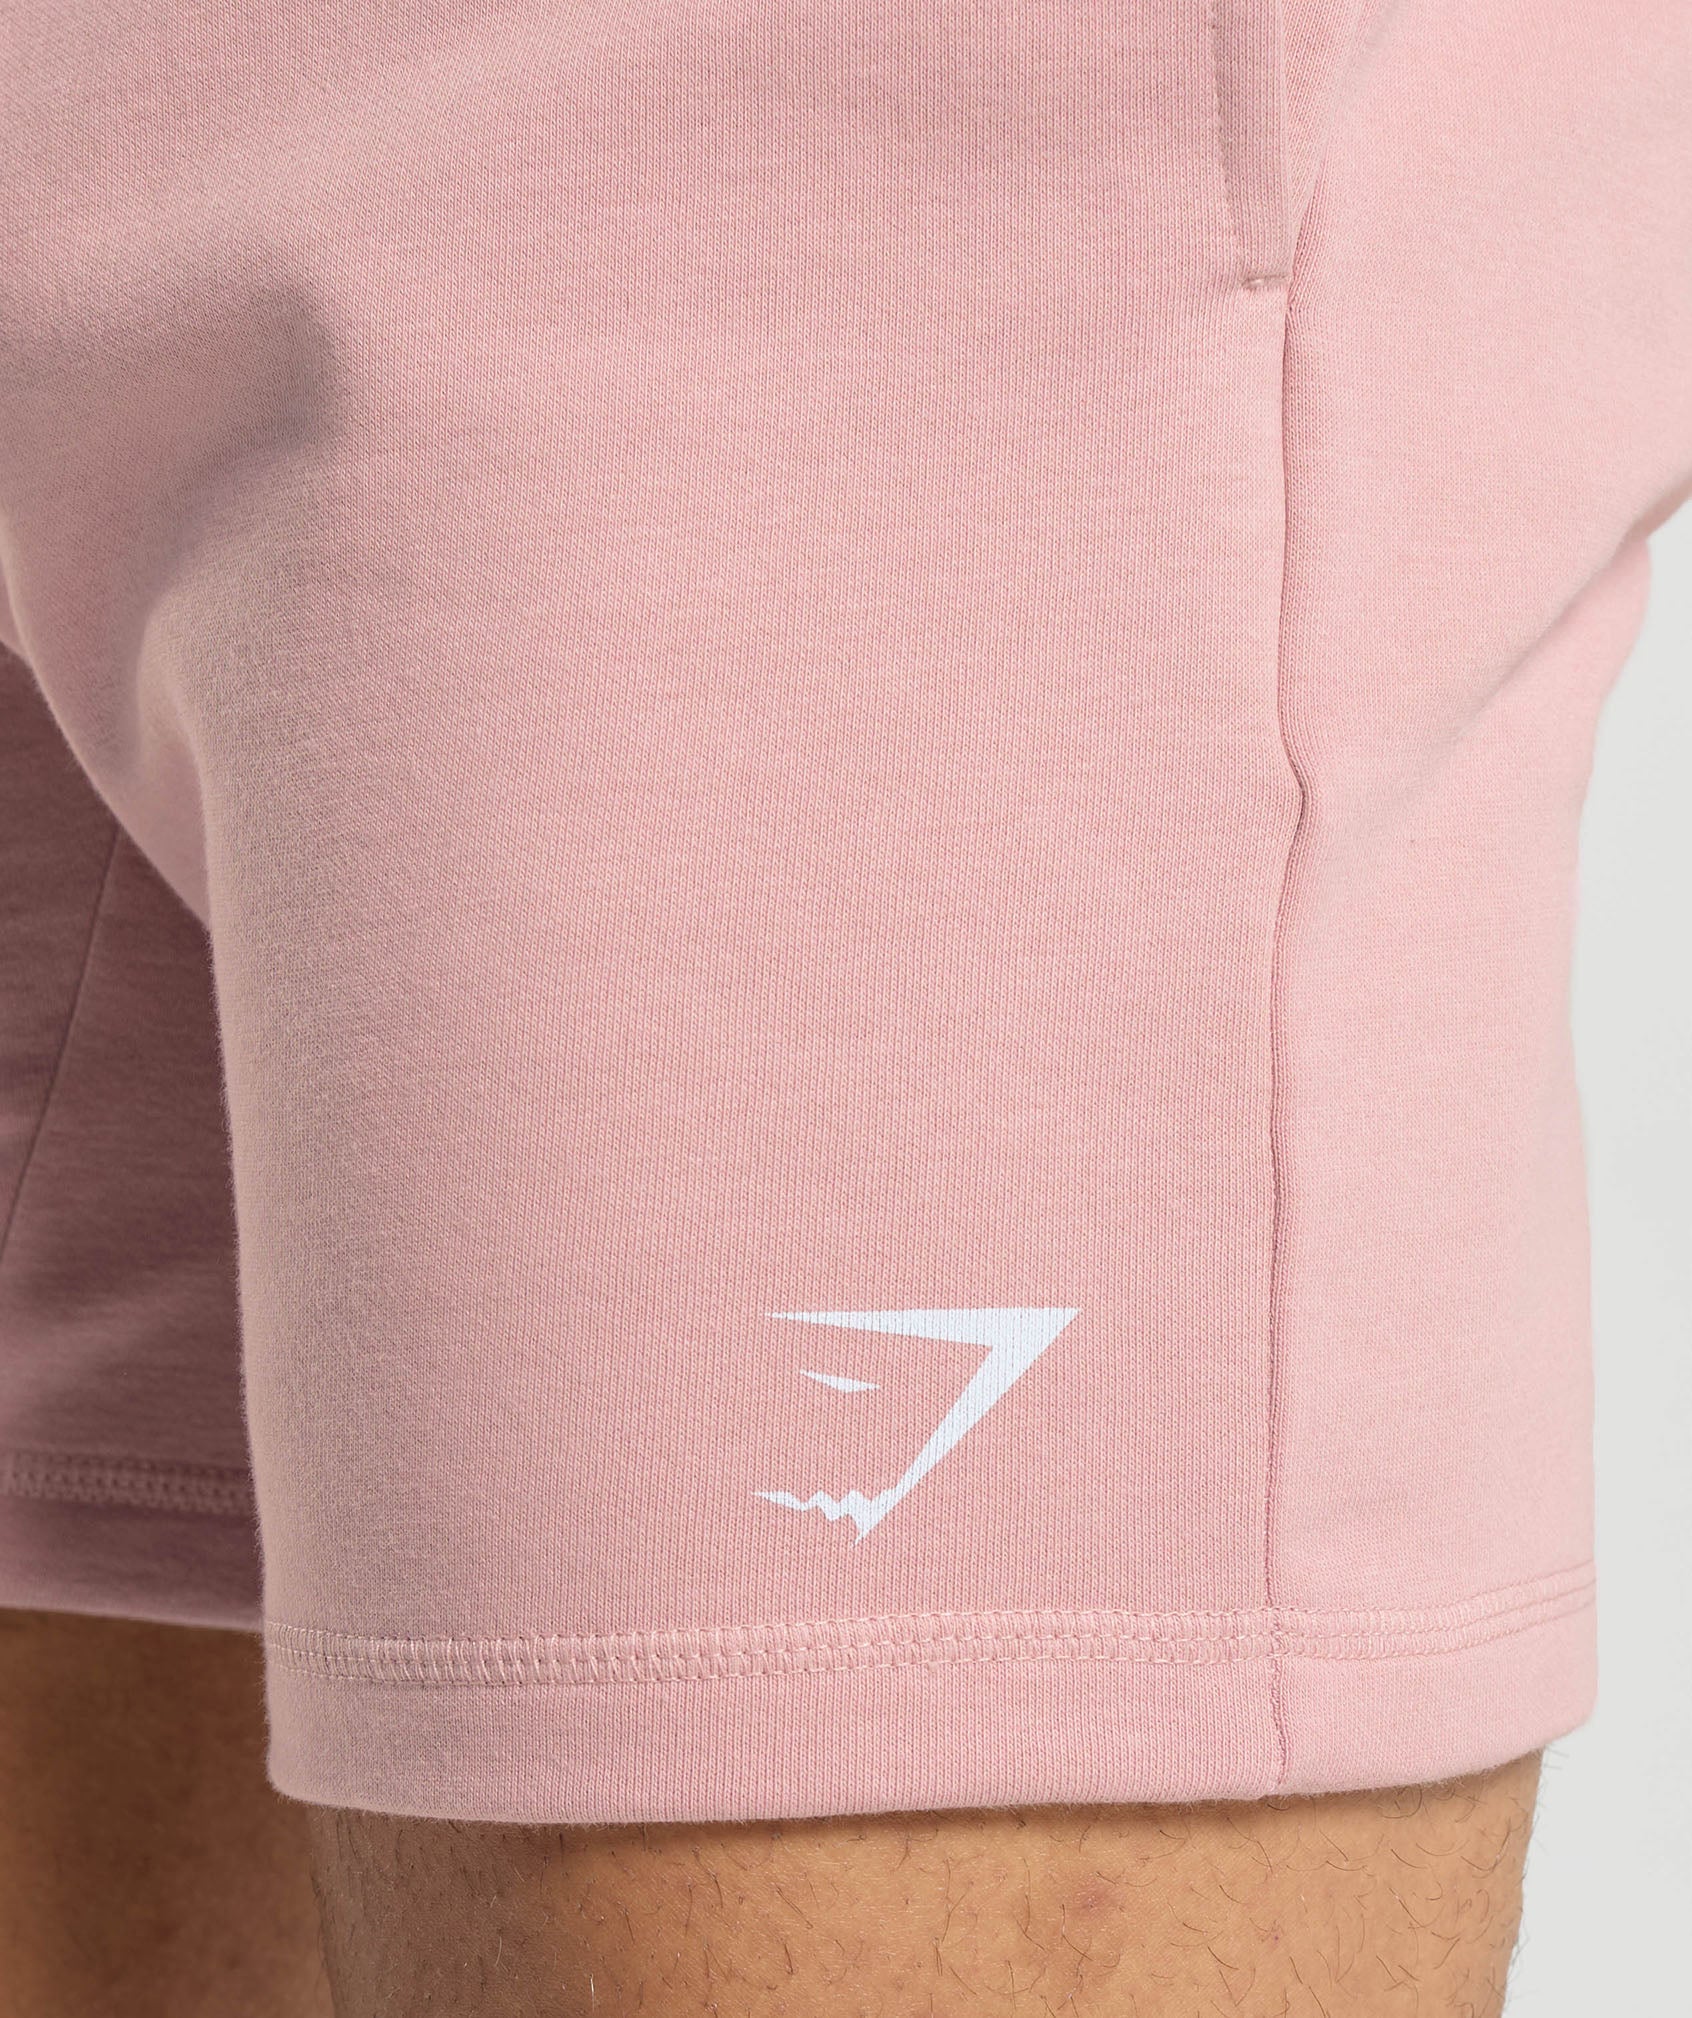 Heavy Duty Apparel 7" Shorts in Light Pink - view 5